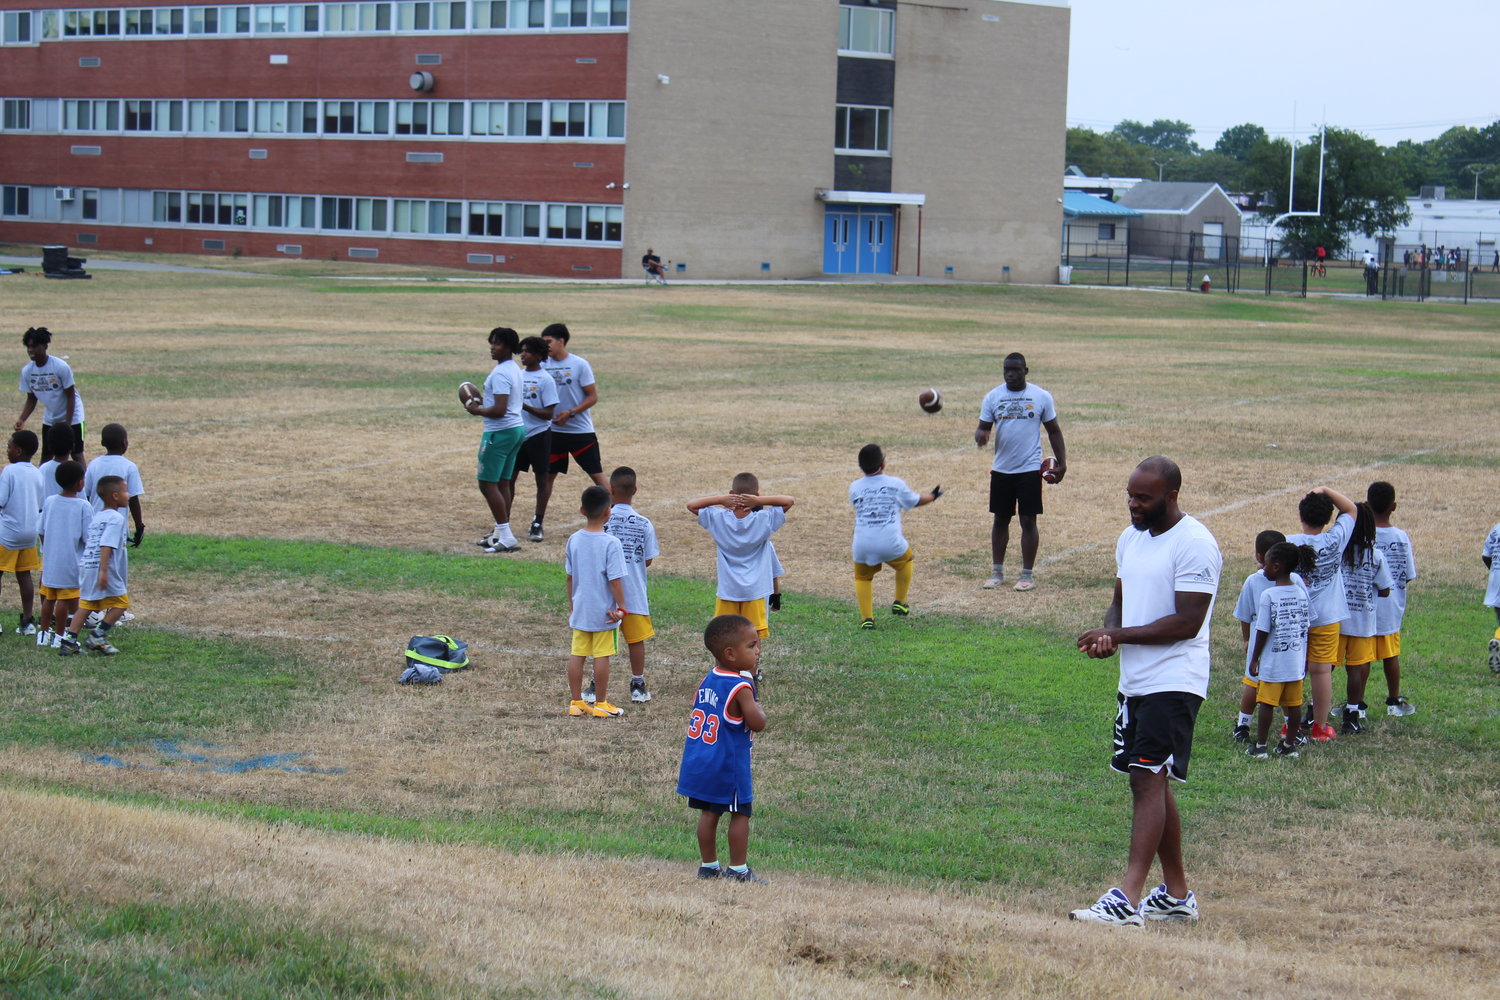 Five-year-olds caught footballs tossed to them by Baldwin High School senior Kwasi Bonsu at the skills clinic July 27.